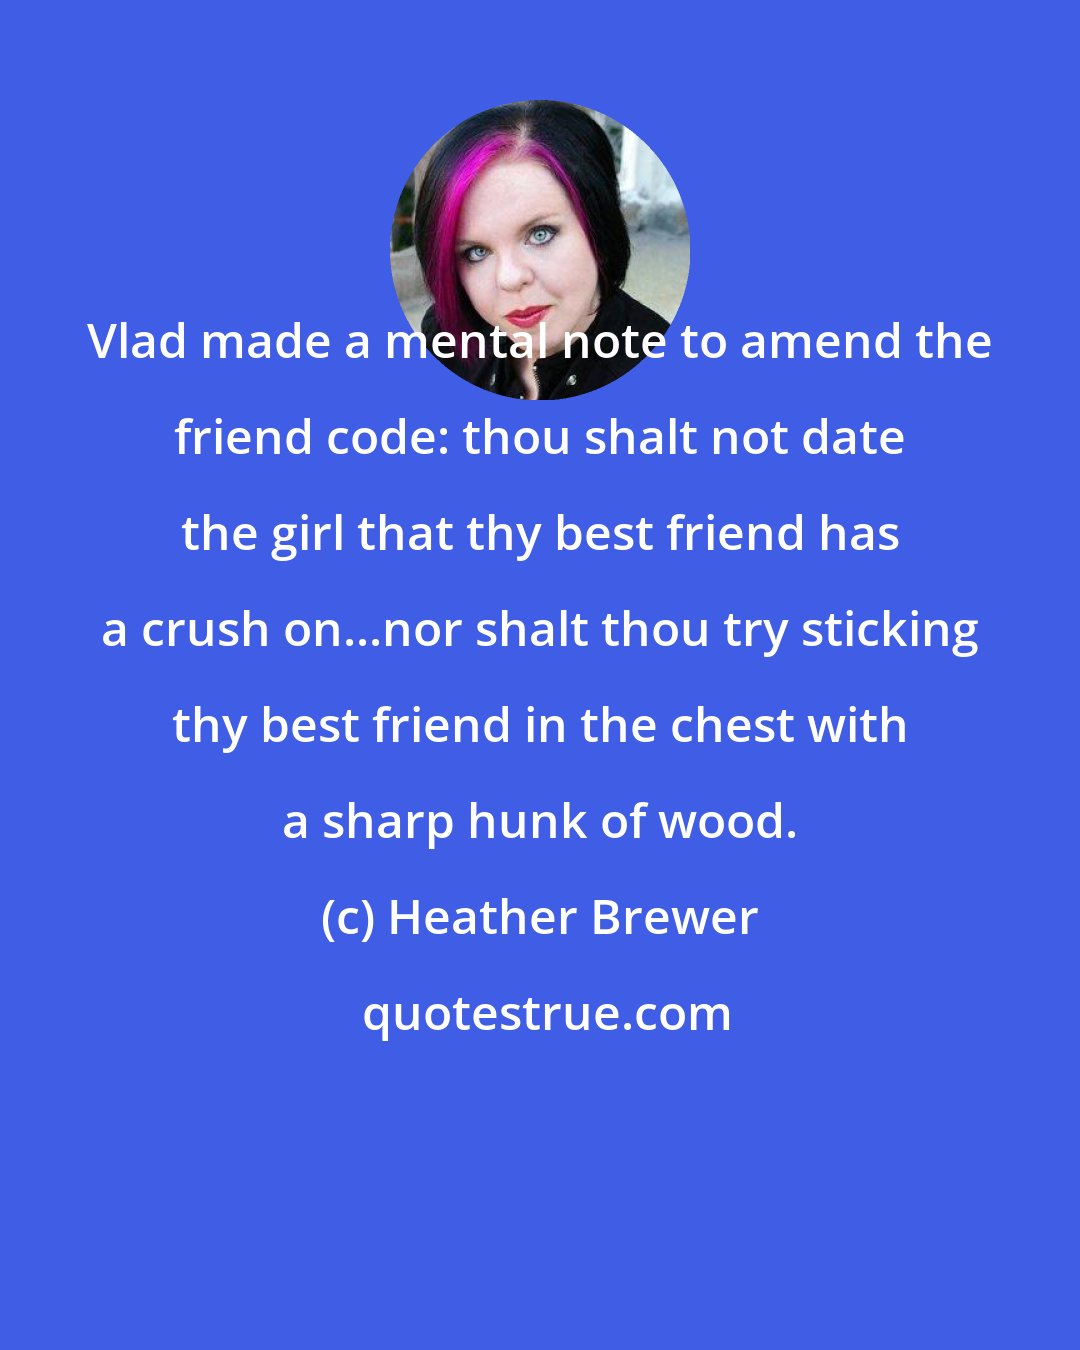 Heather Brewer: Vlad made a mental note to amend the friend code: thou shalt not date the girl that thy best friend has a crush on...nor shalt thou try sticking thy best friend in the chest with a sharp hunk of wood.